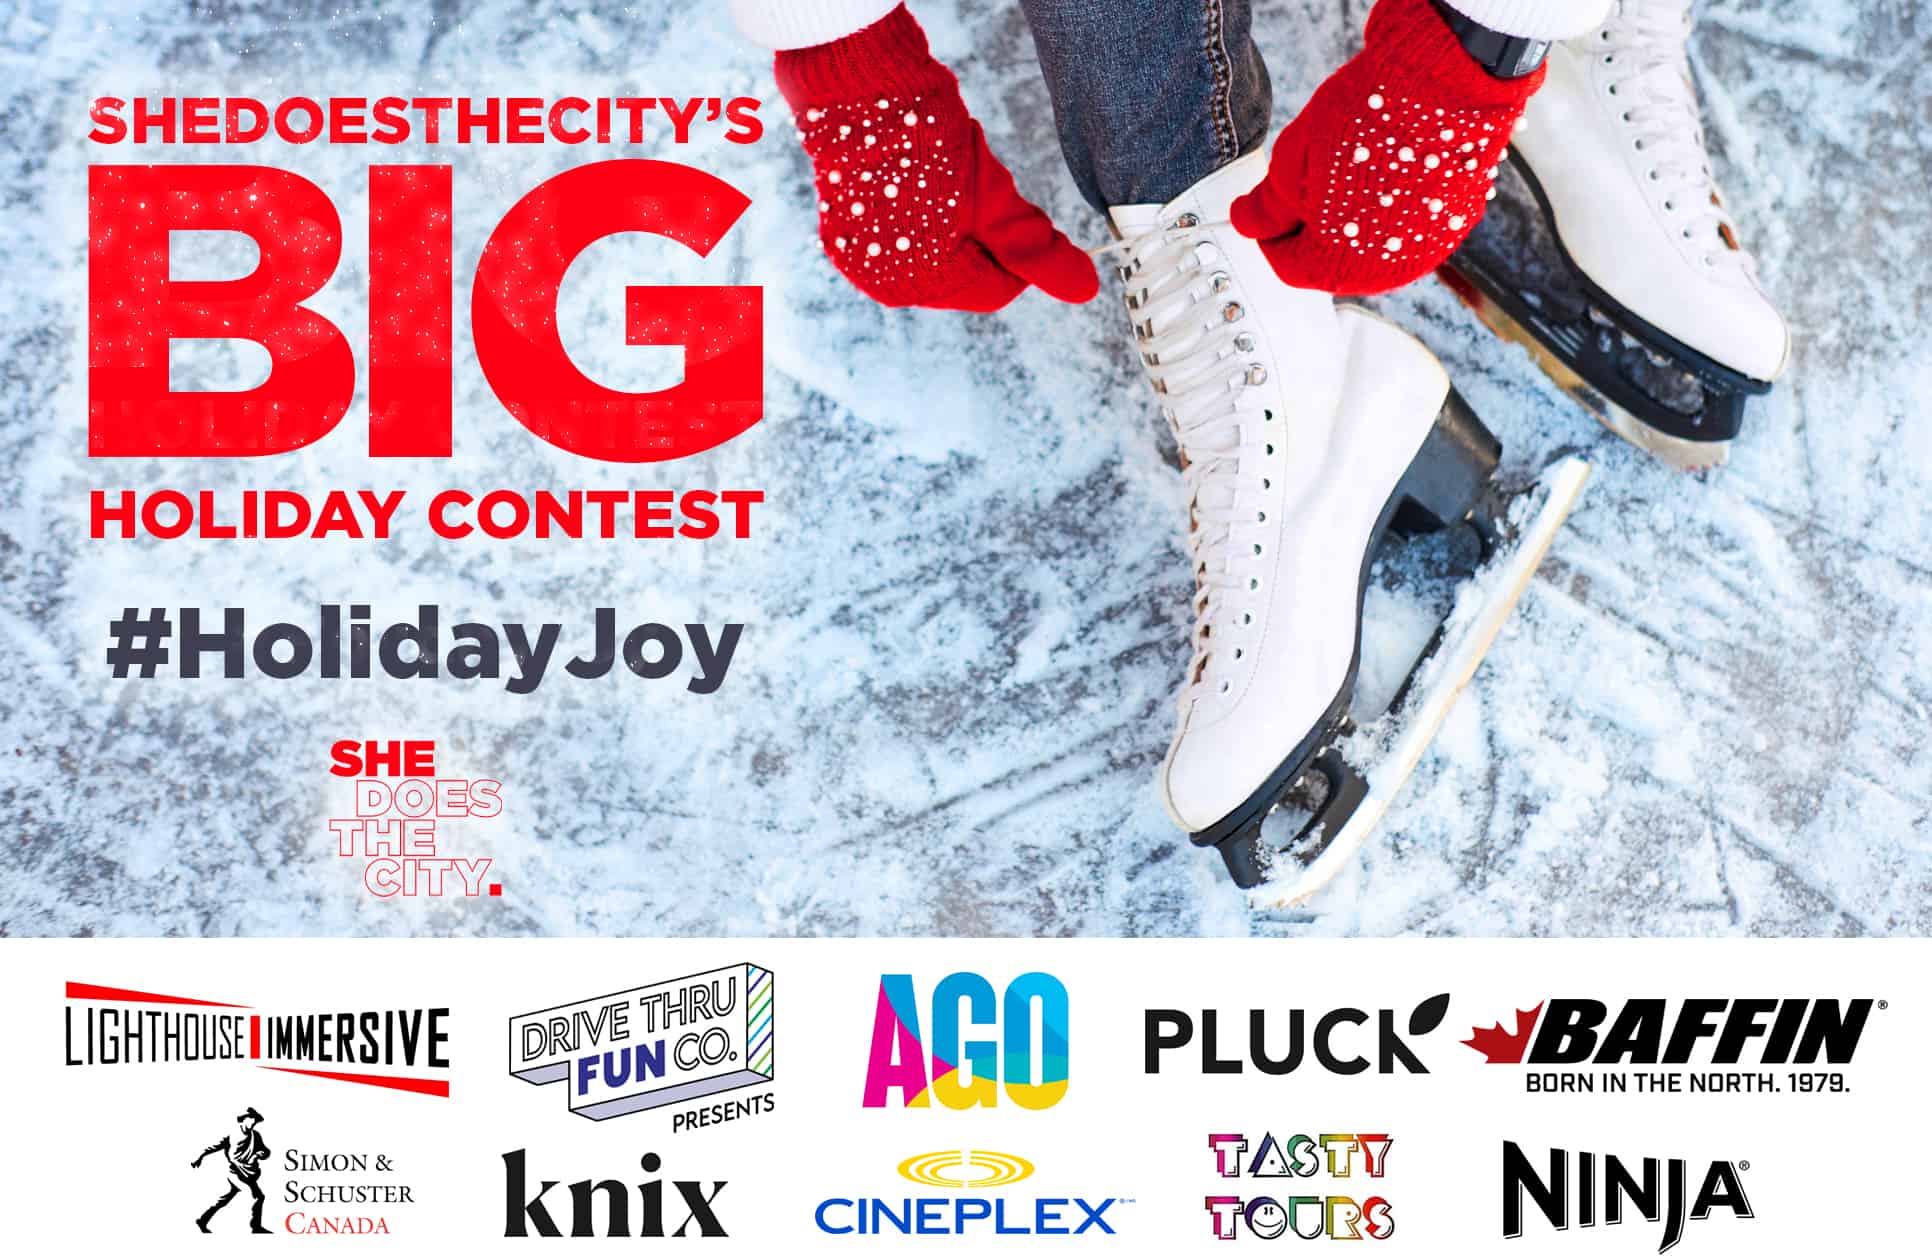 HolidayJoy Contest: 10 Days Of Incredible Giveaways To Bring You Comfort  And Joy This Holiday Season!